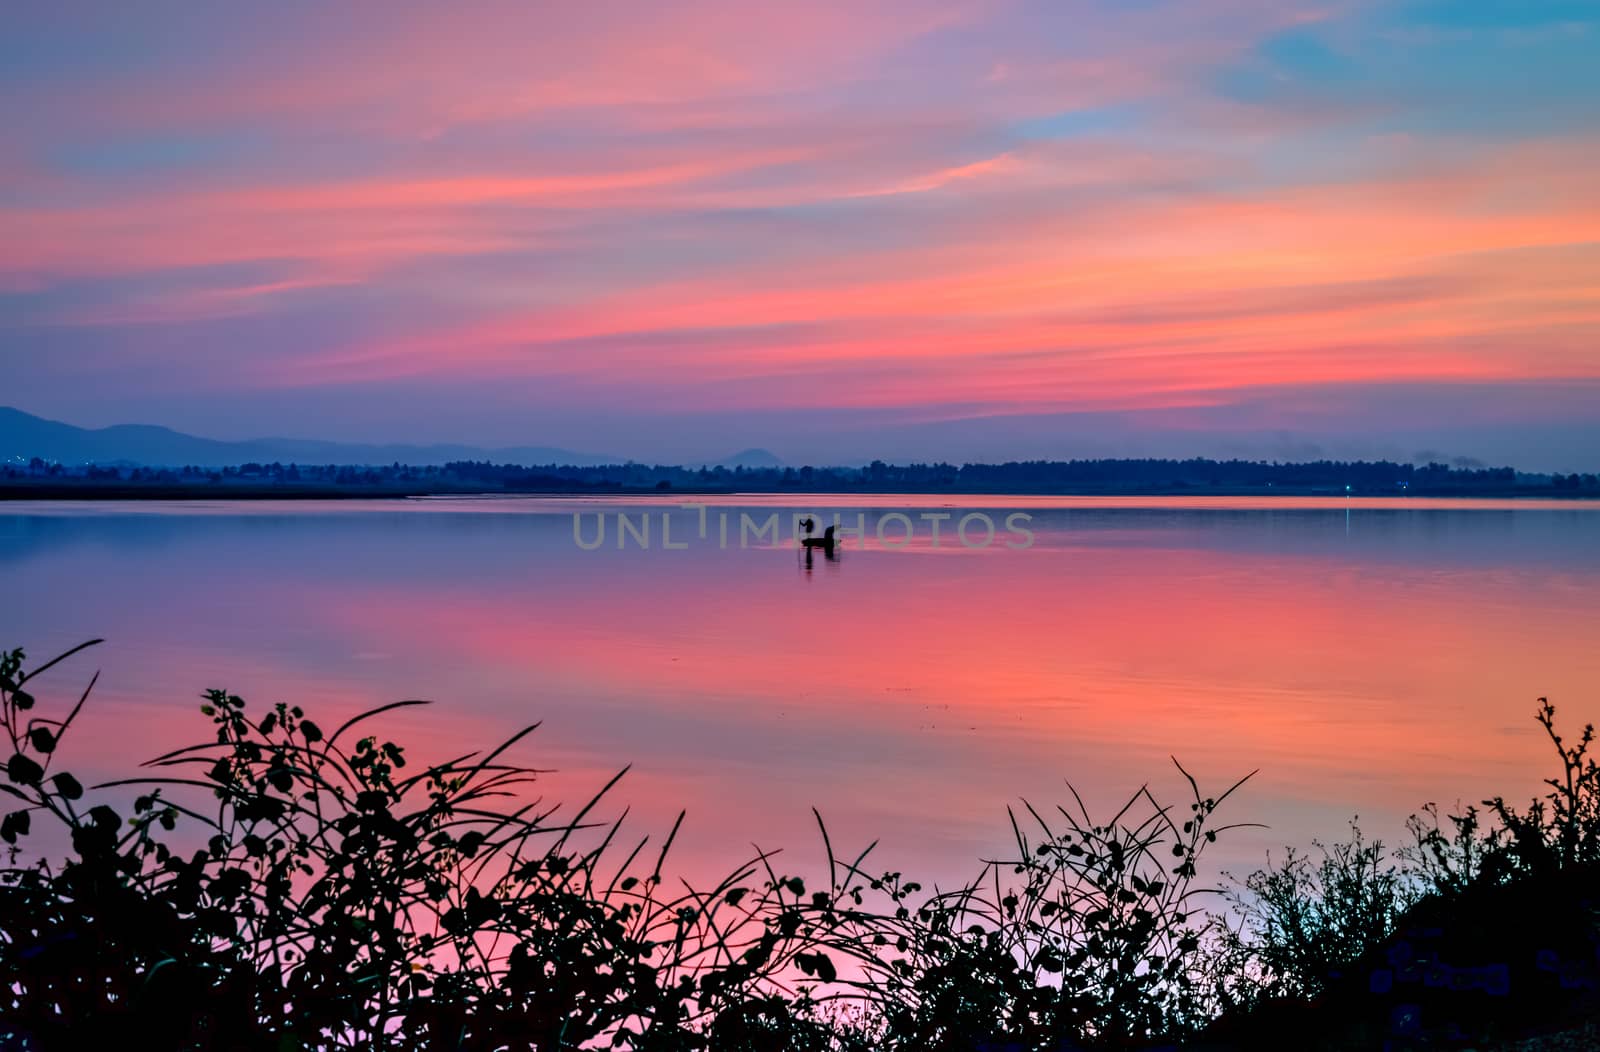 Beautiful evening sky over a lake in Hampi, Karnataka, India with nice dusk colors in the sky and lake. by lalam